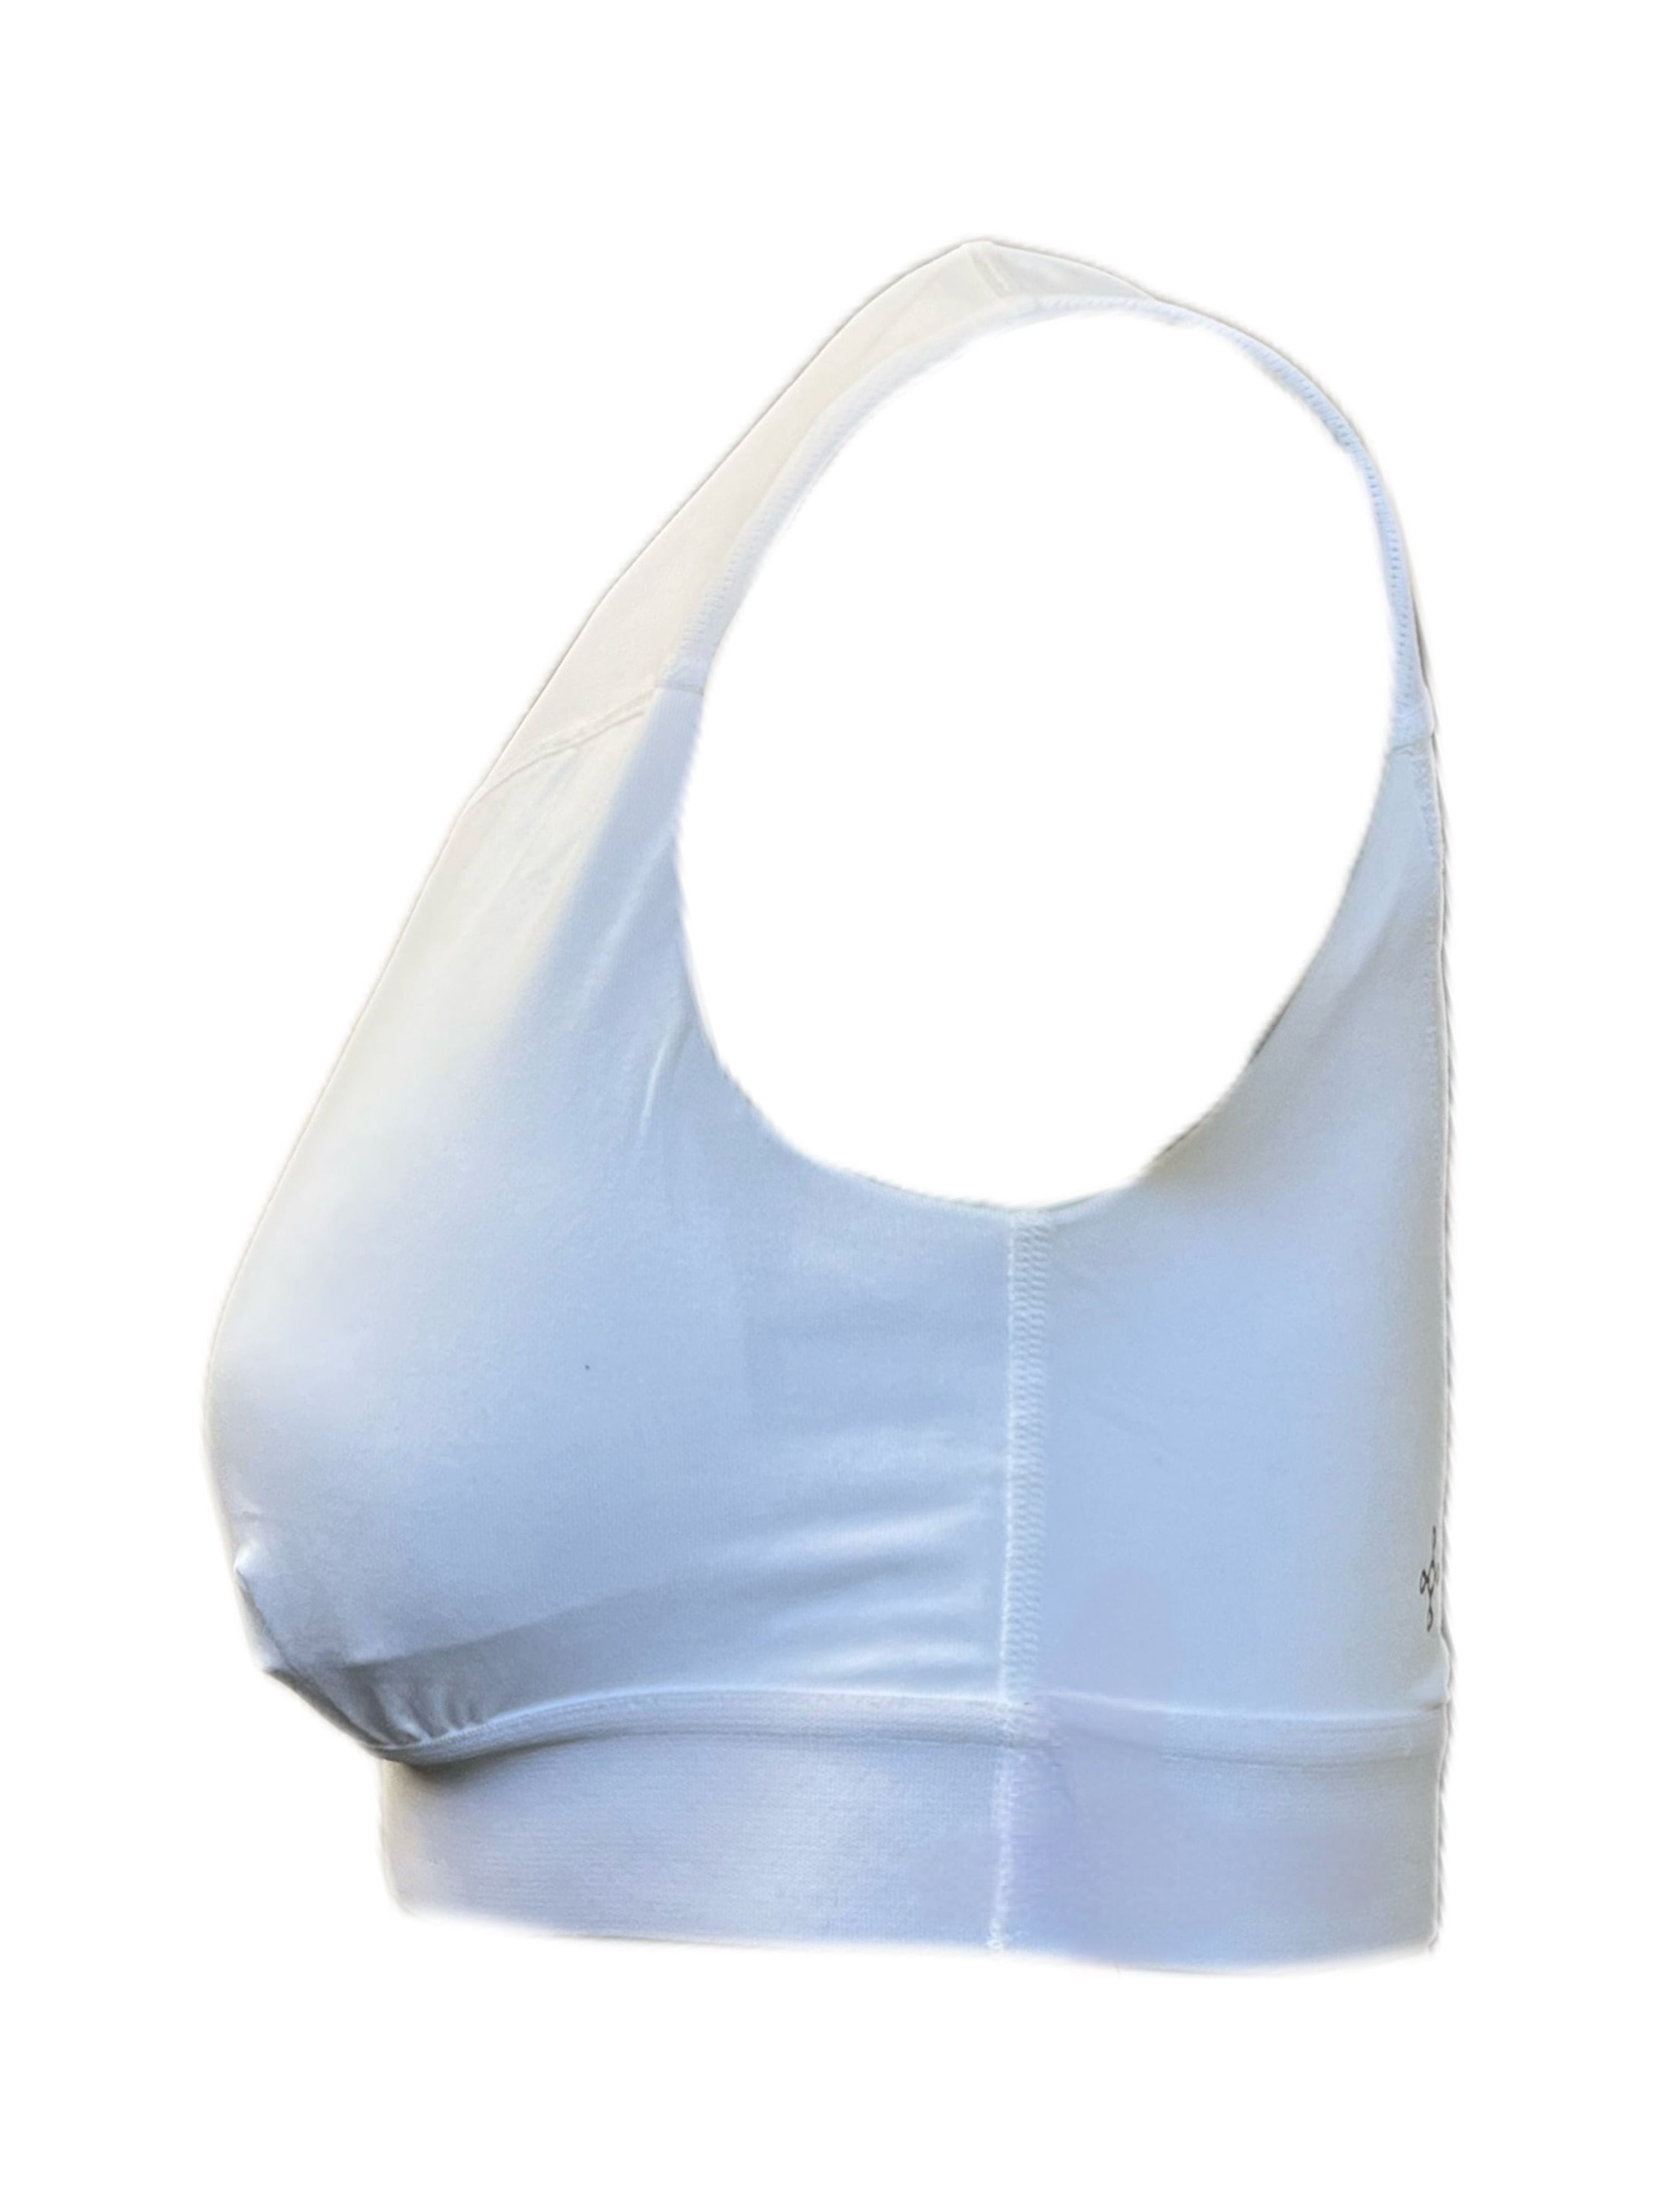 TOMMIE COPPER Womens White Shoulder Support Comfort Bra, X-Large 